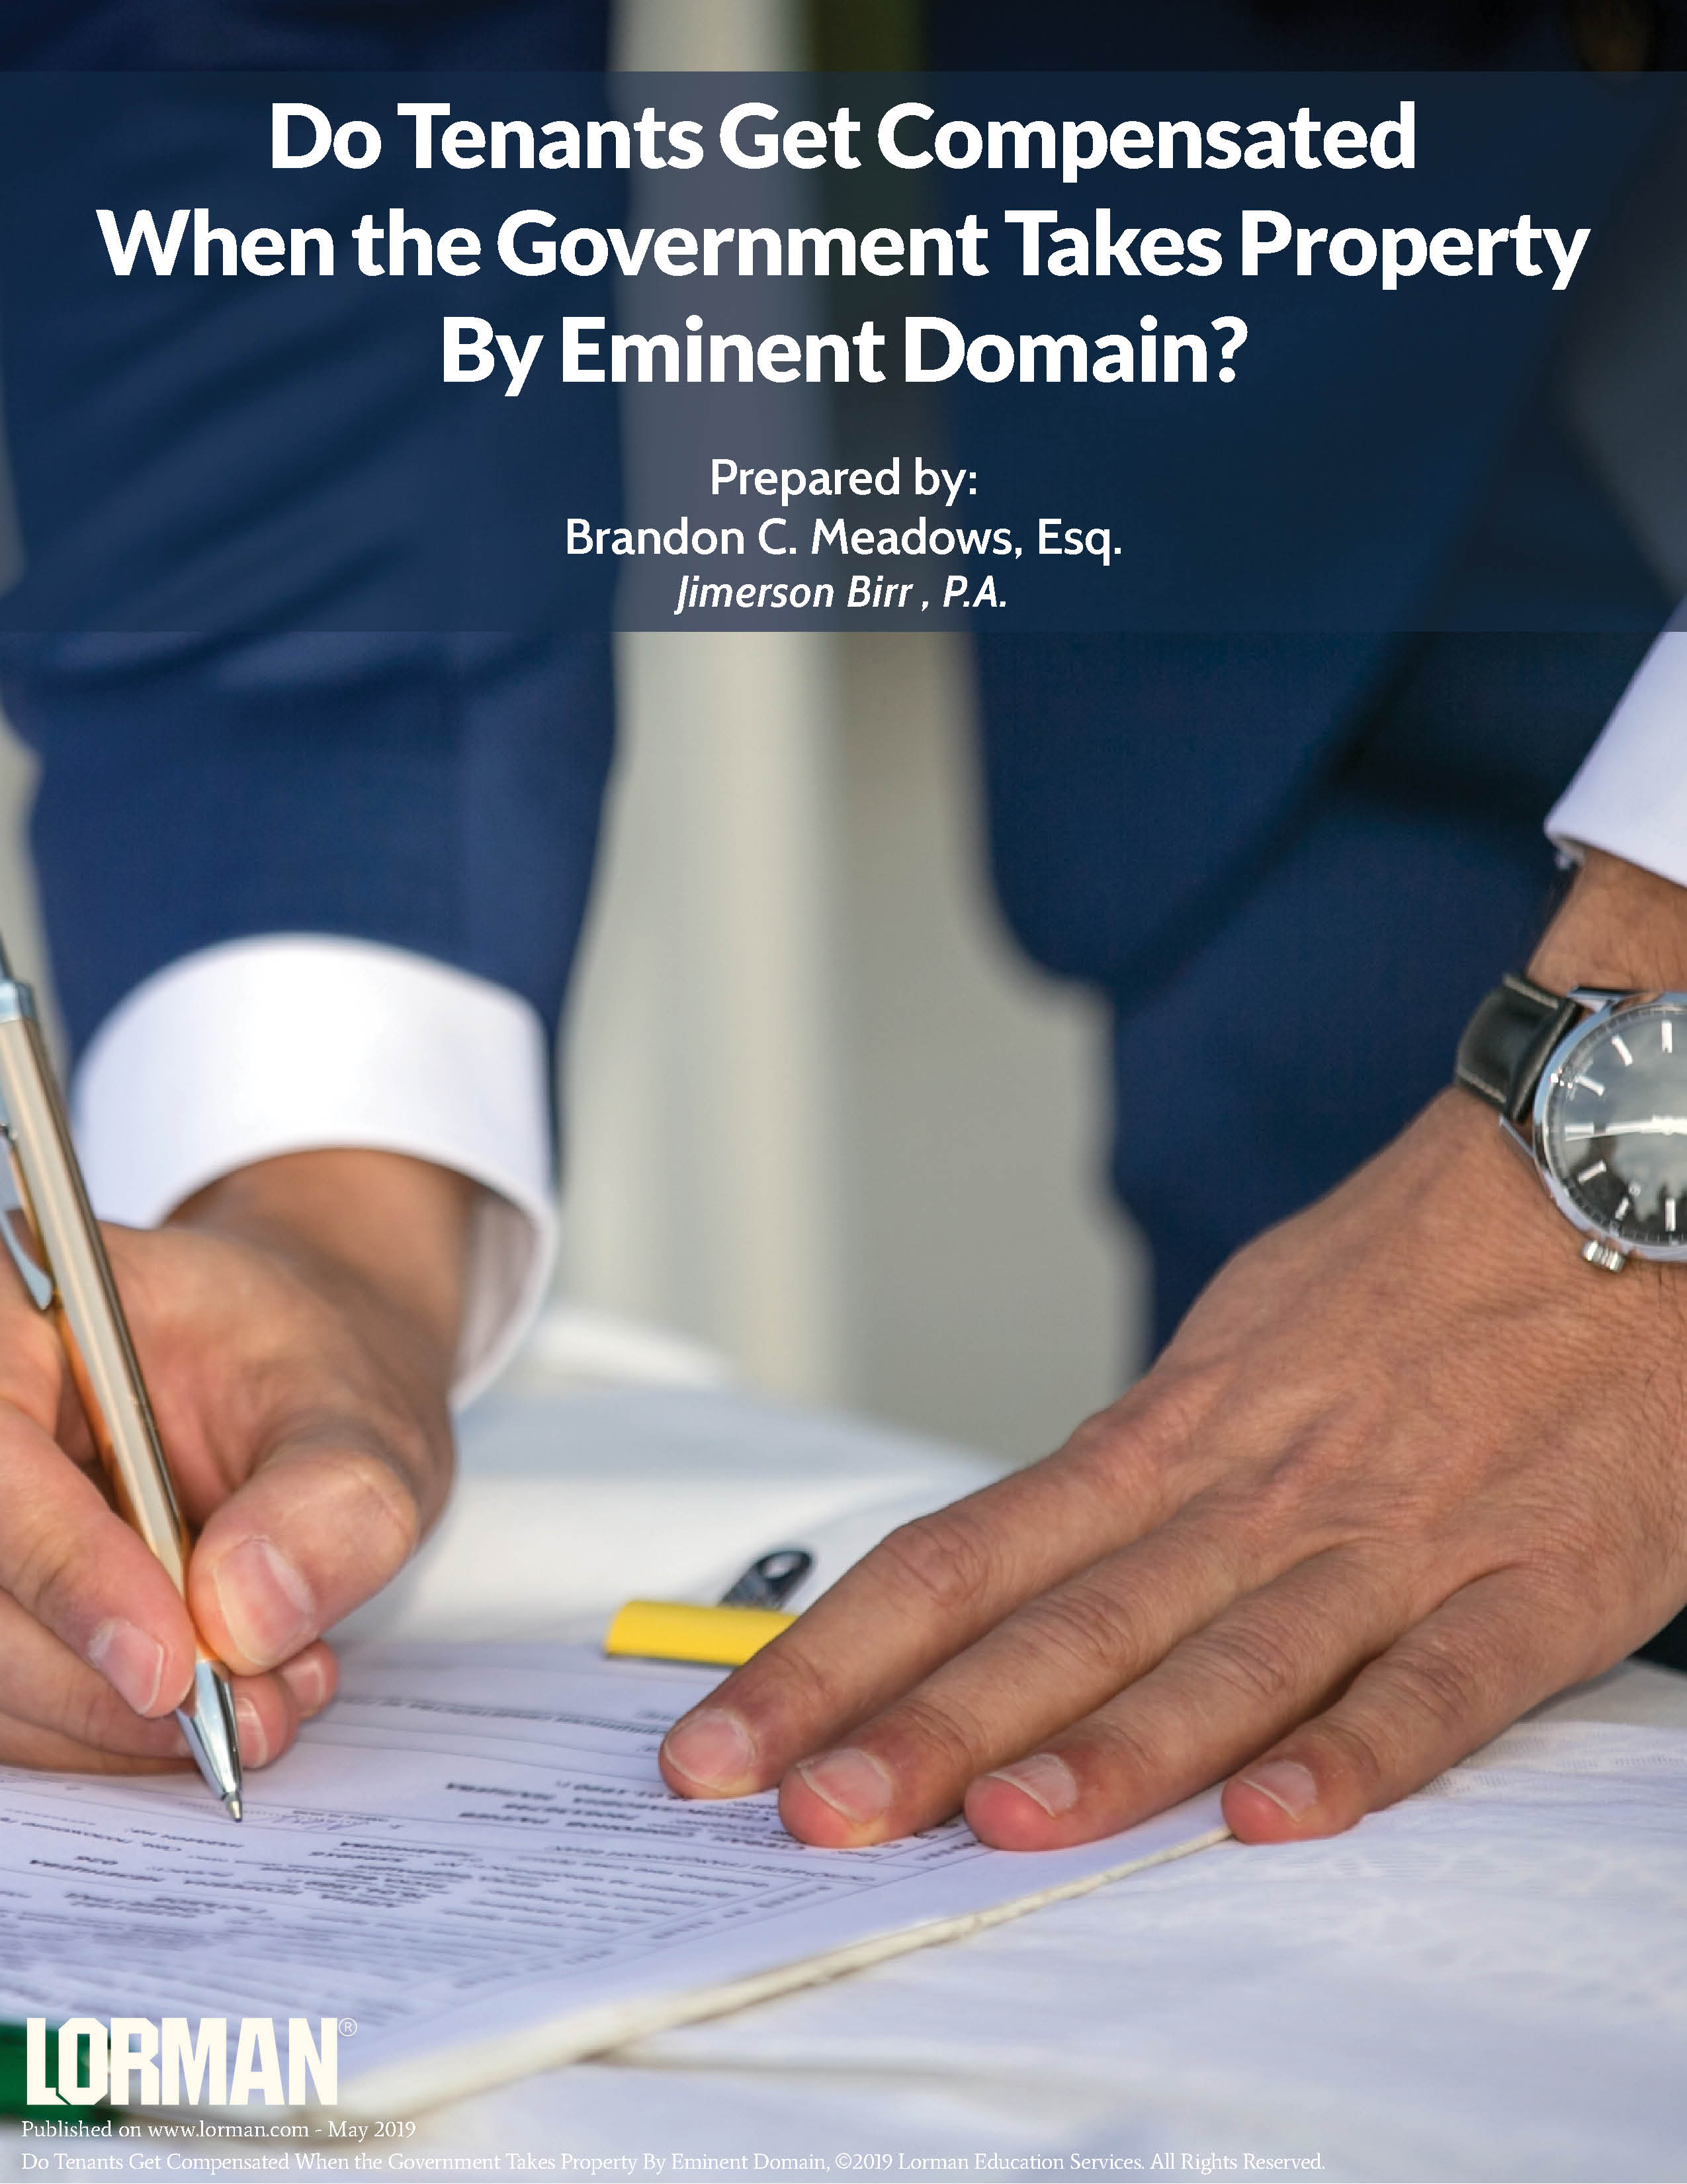 Do Tenants Get Compensated When the Government Takes Property By Eminent Domain?